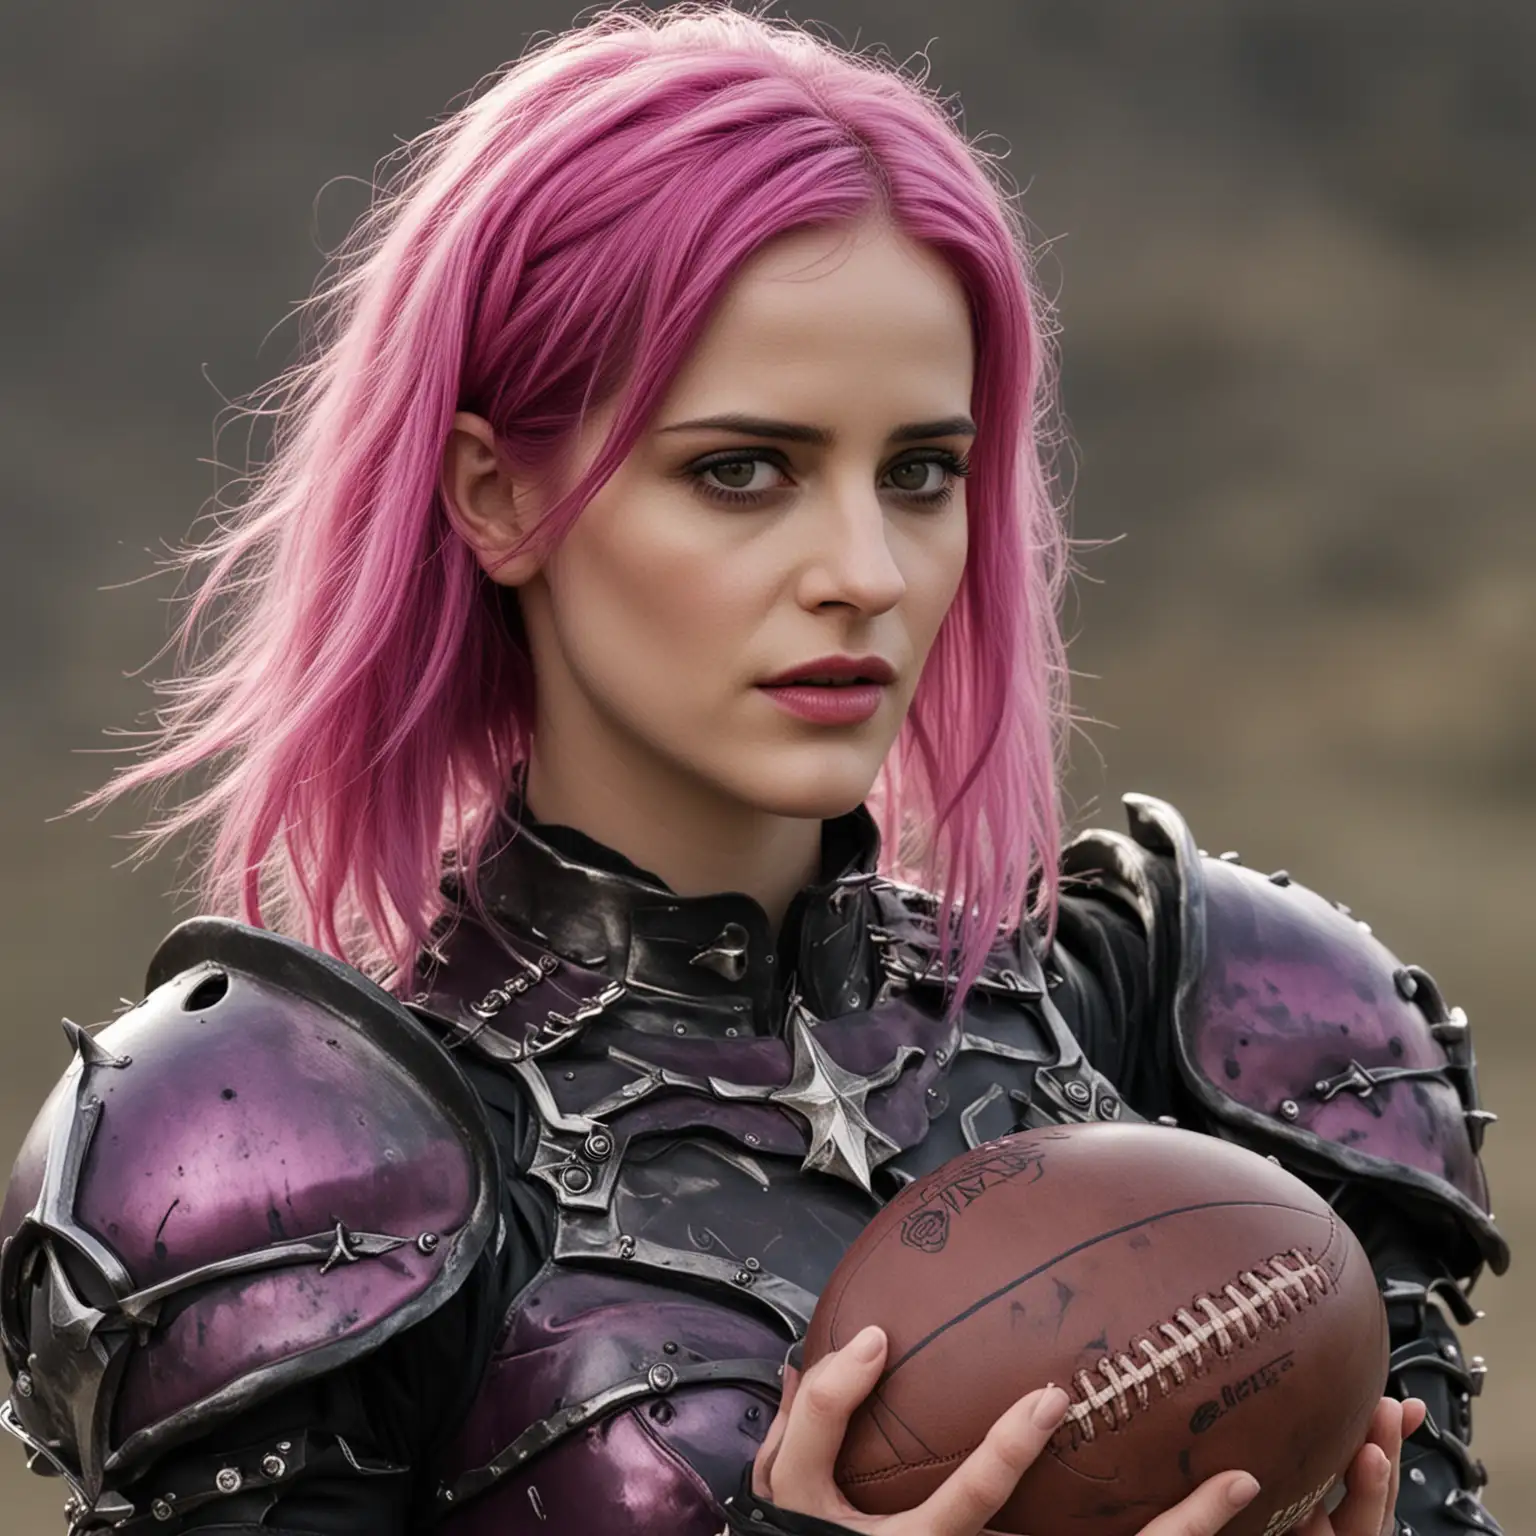 Evil Female Elf with Pink Hair in Dark Purple Armor Holding Spiked American Football